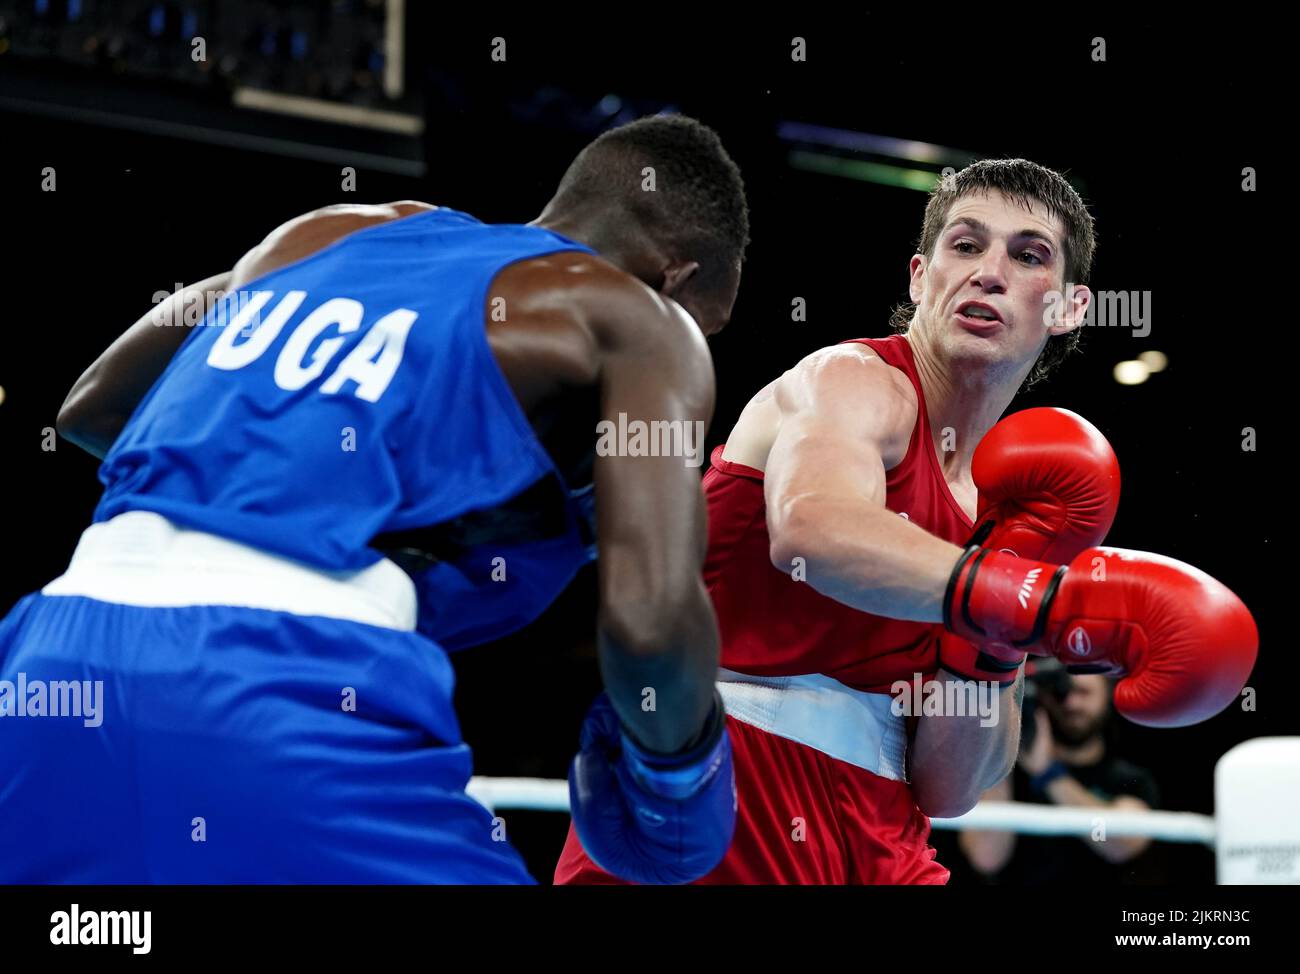 Canada's Wyatt Sanford (right) and Uganda's Joshua Tukamuhebwa during the Men's Over 60kg-63.5kg (Light Welter) - Quarter-Final 2 at The NEC on day six of the 2022 Commonwealth Games in Birmingham. Picture date: Wednesday August 3, 2022. Stock Photo